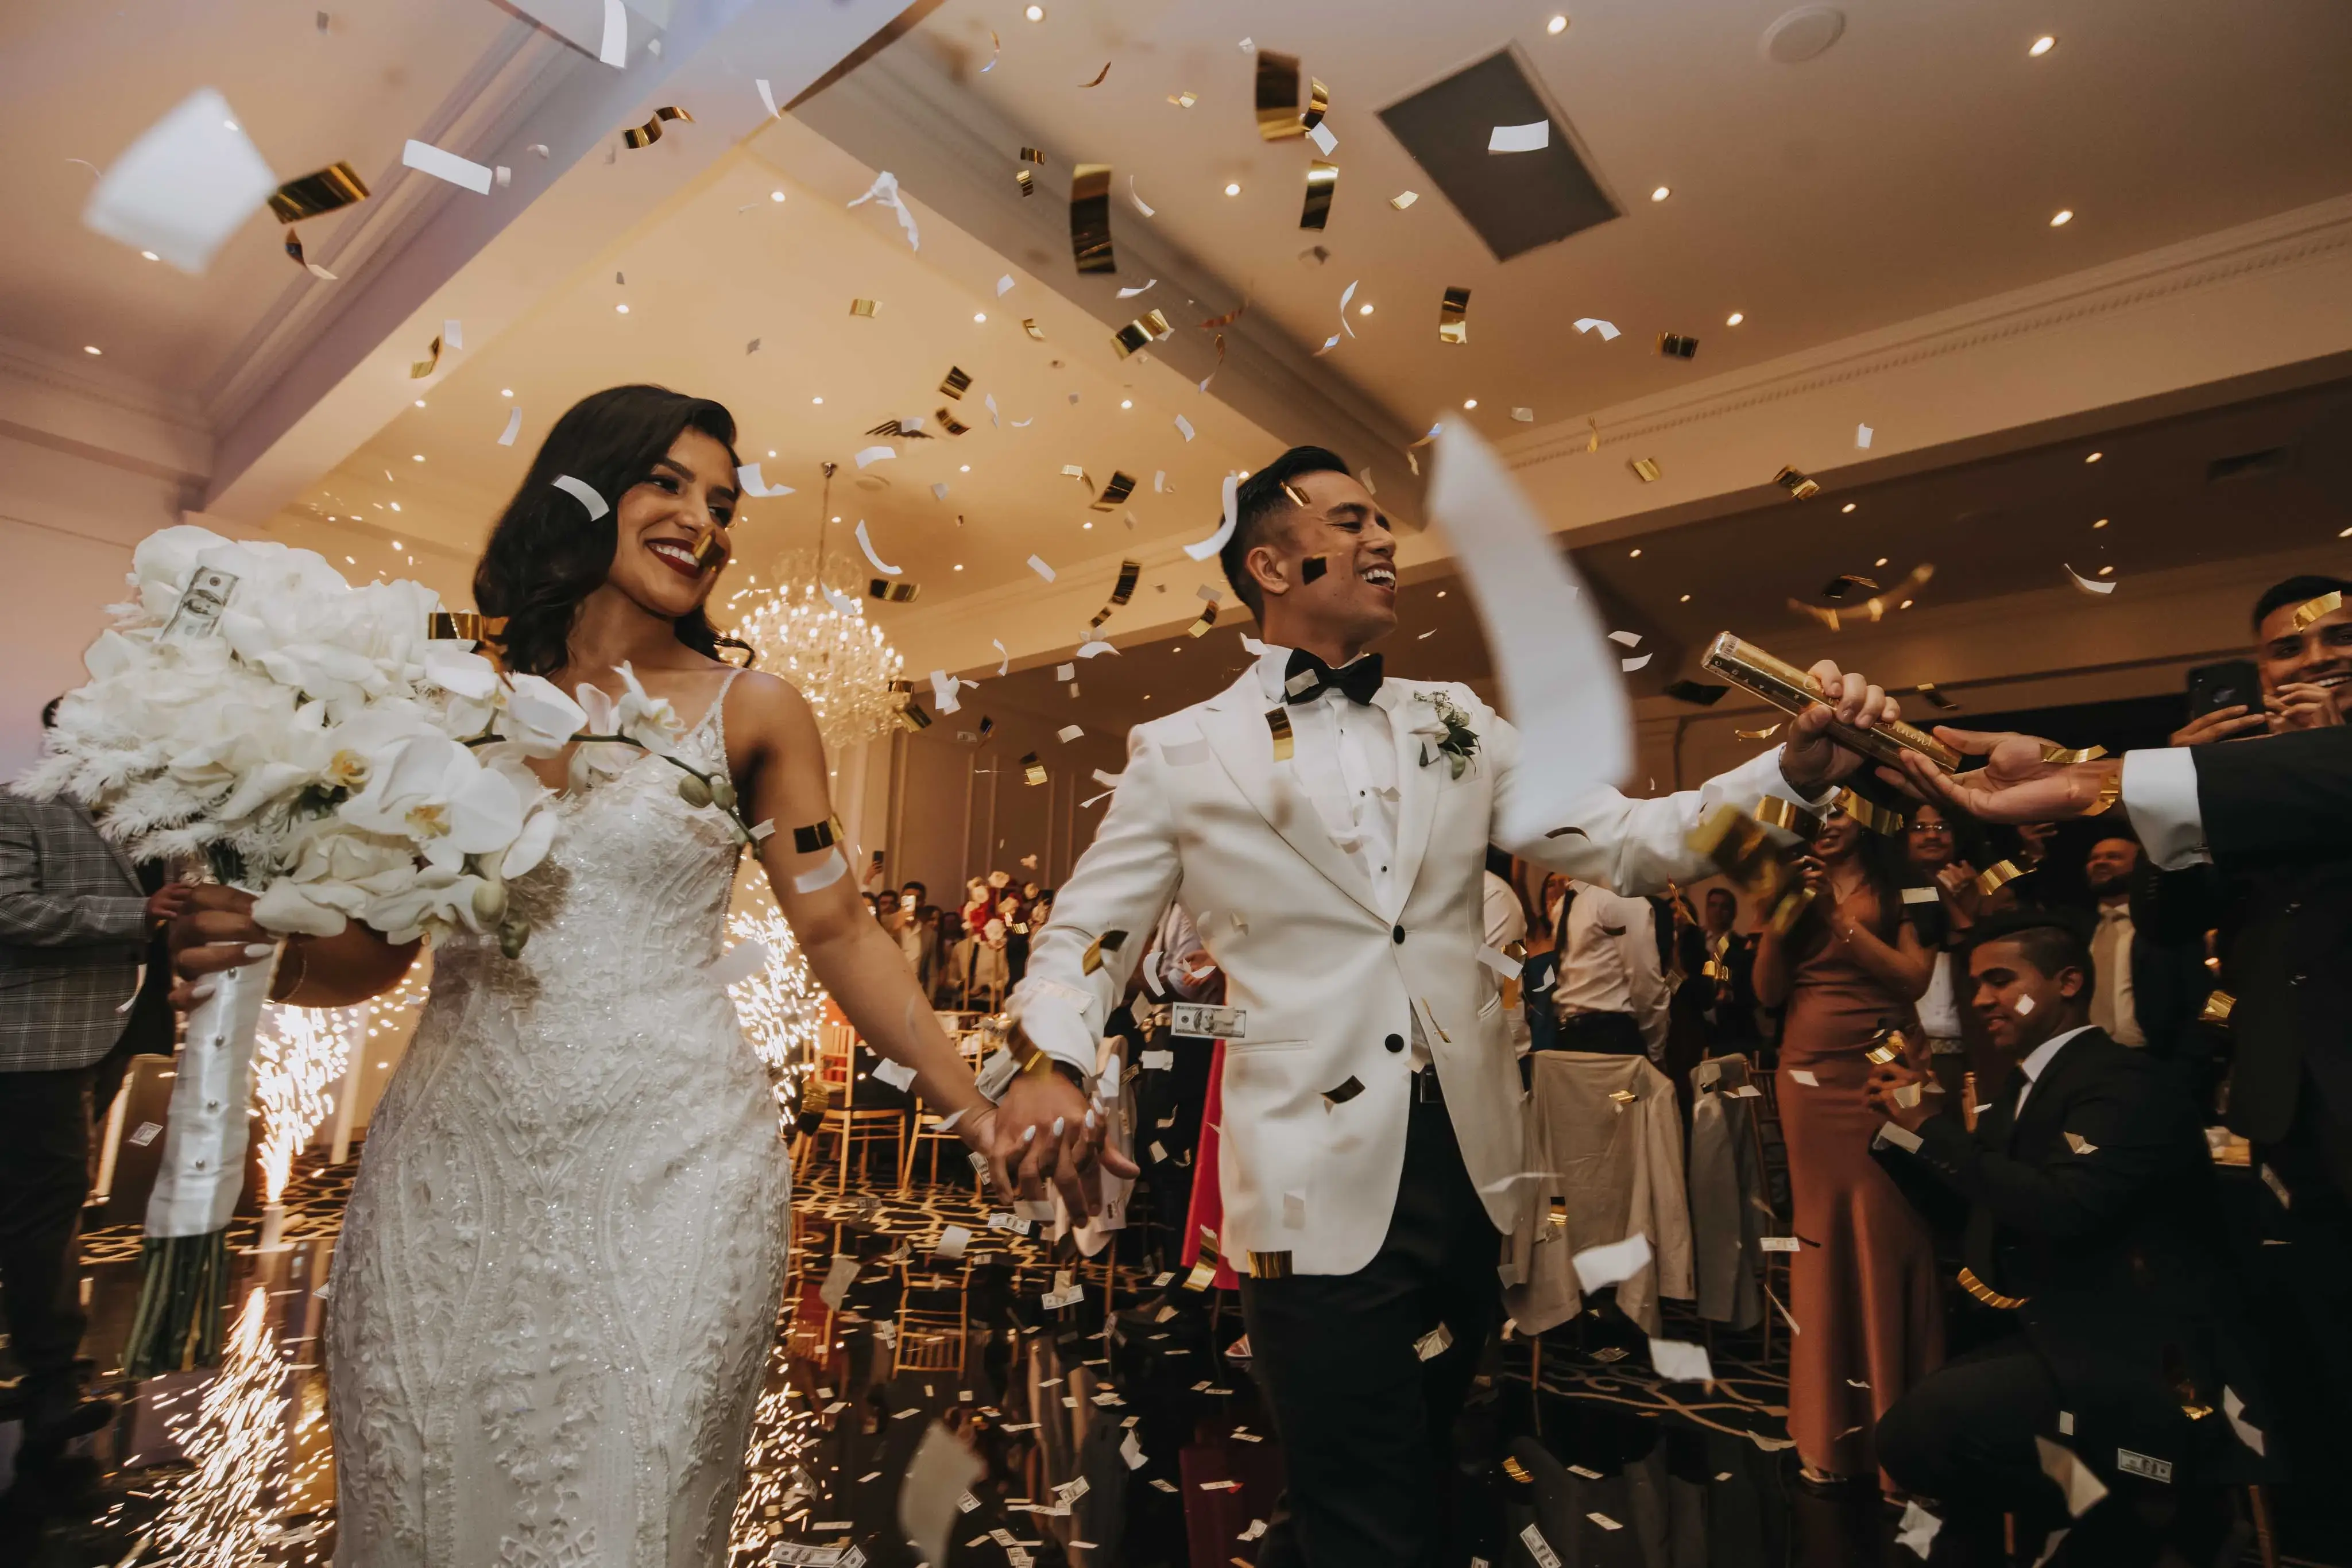 Elegant wedding photography Melbourne by LaterStory, capturing Savionna and Bryan's joyful reception at Manor on High on December 30, 2022.